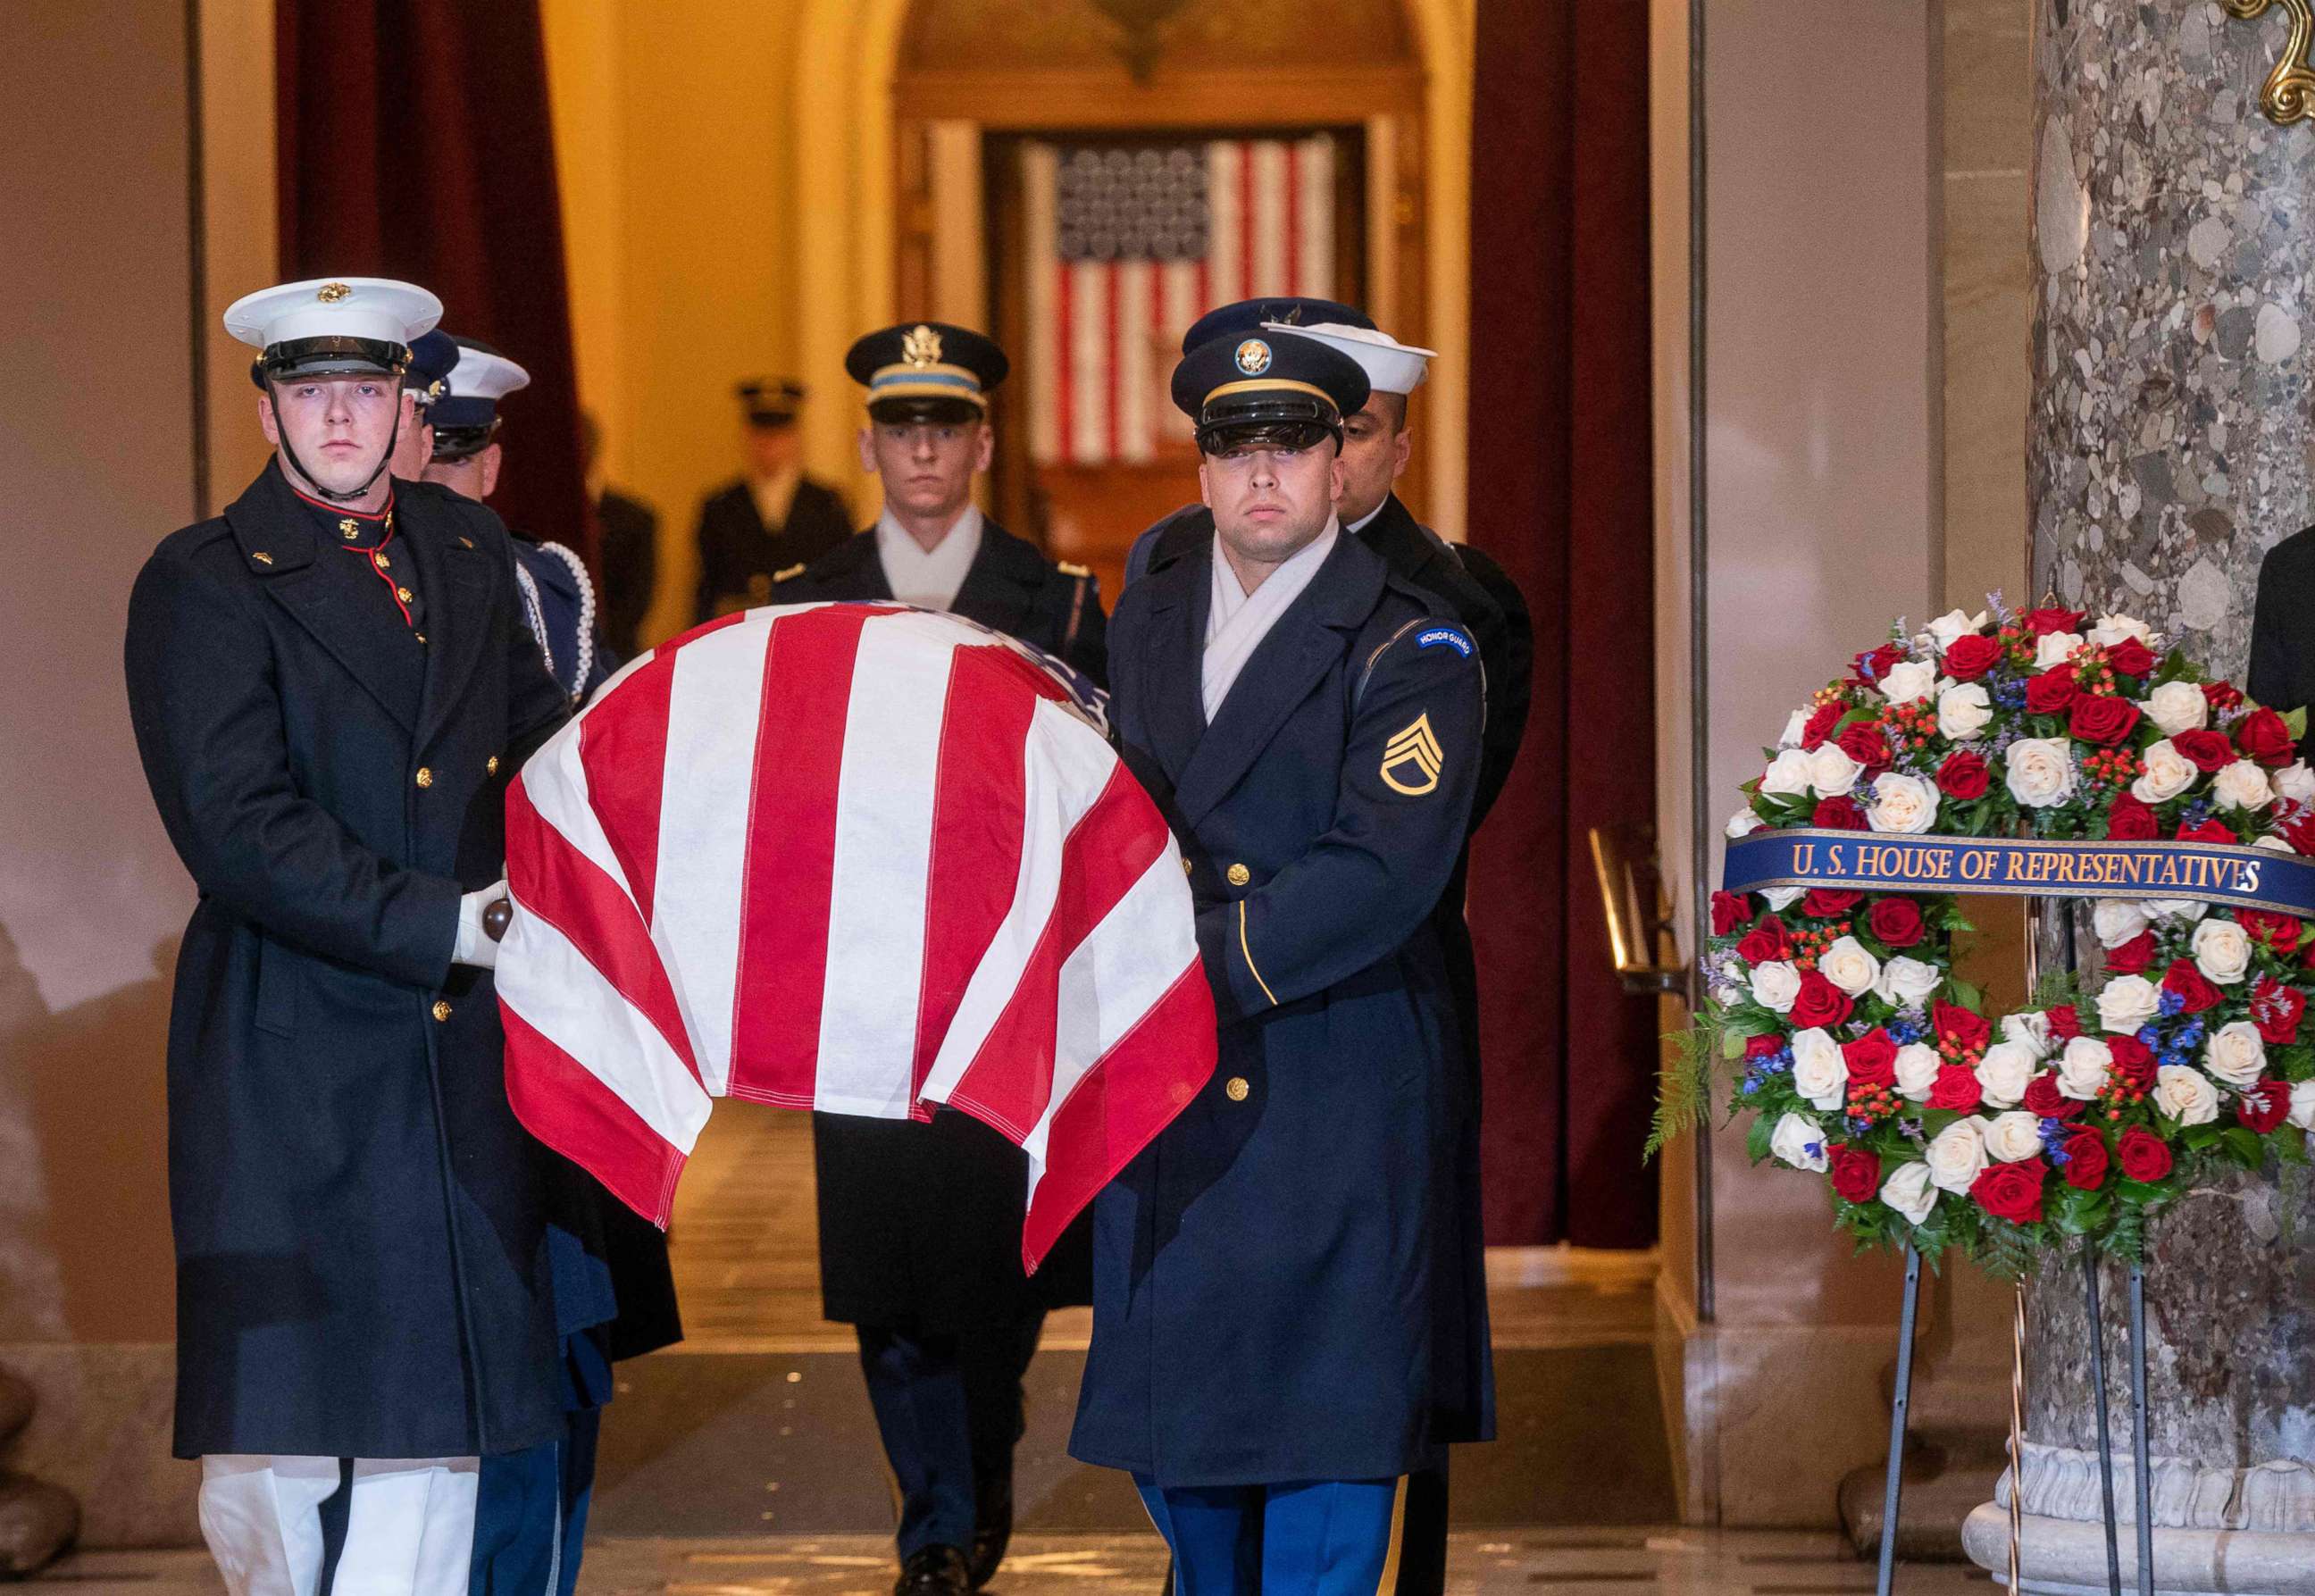 PHOTO: A military honor guard carries the casket of Rep. Don Young, the longest-serving Republican in House history, to lie in state at the US Capitol in Washington on March 29, 2022.